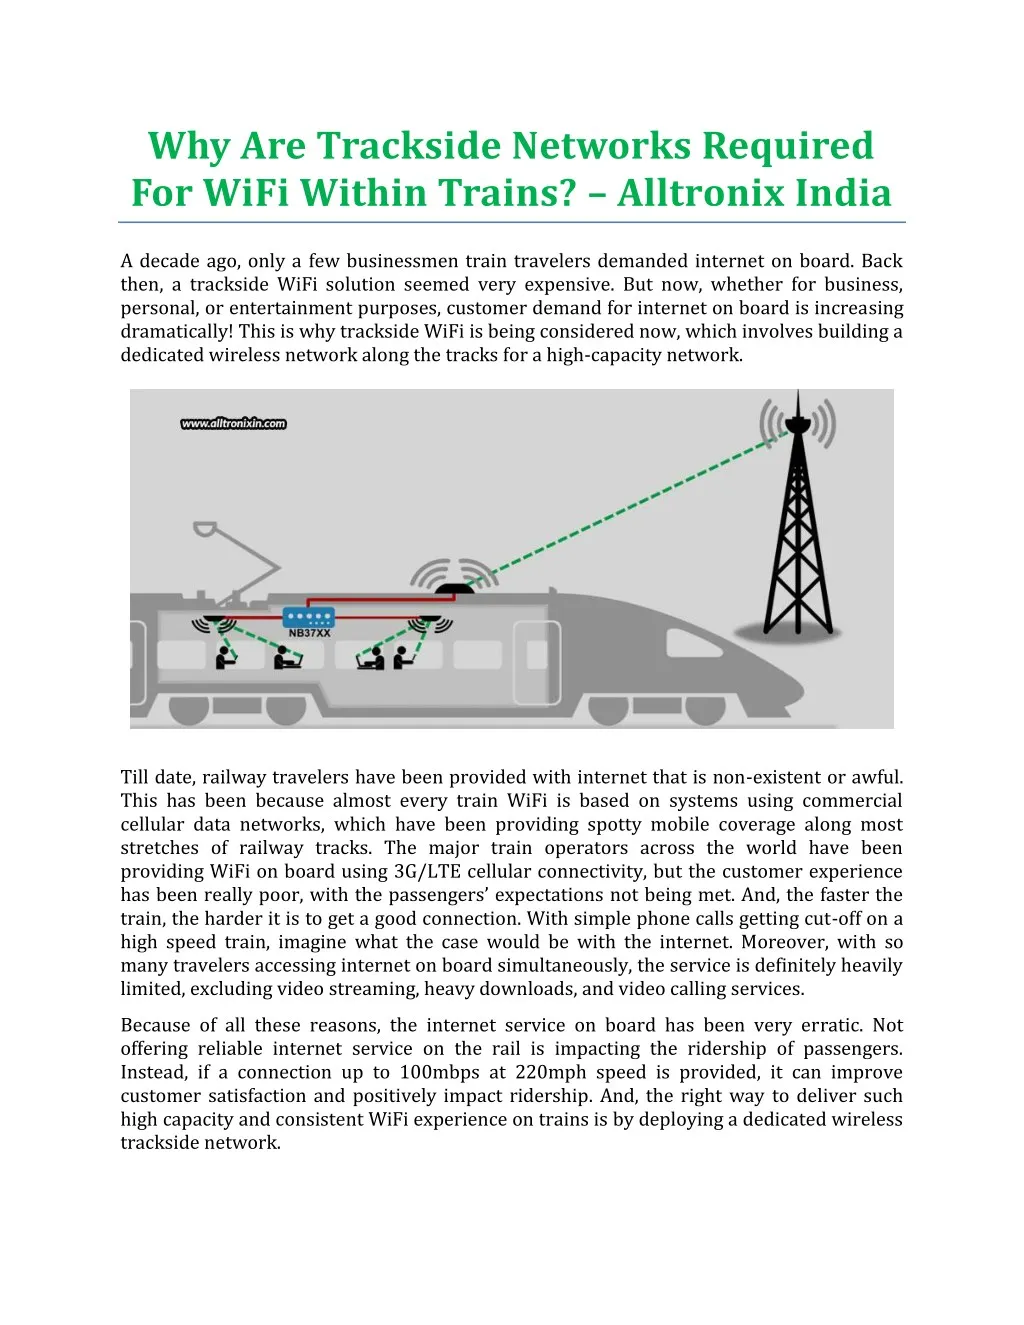 why are trackside networks required for wifi